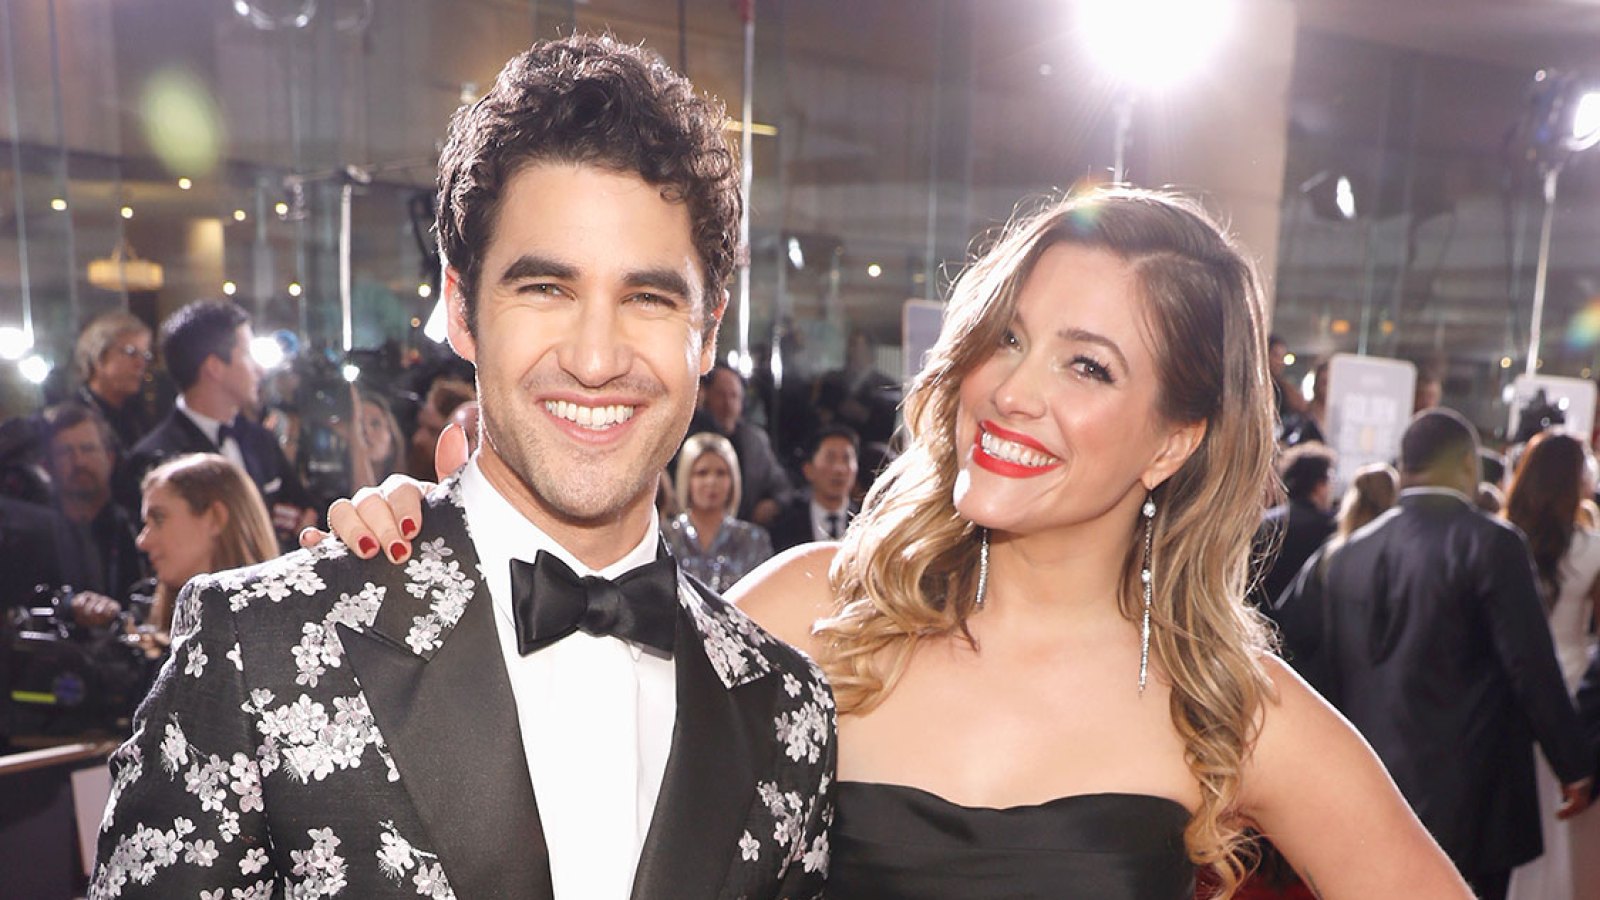 Darren Criss and New Wife Mia Share a Kiss at Tom Tom